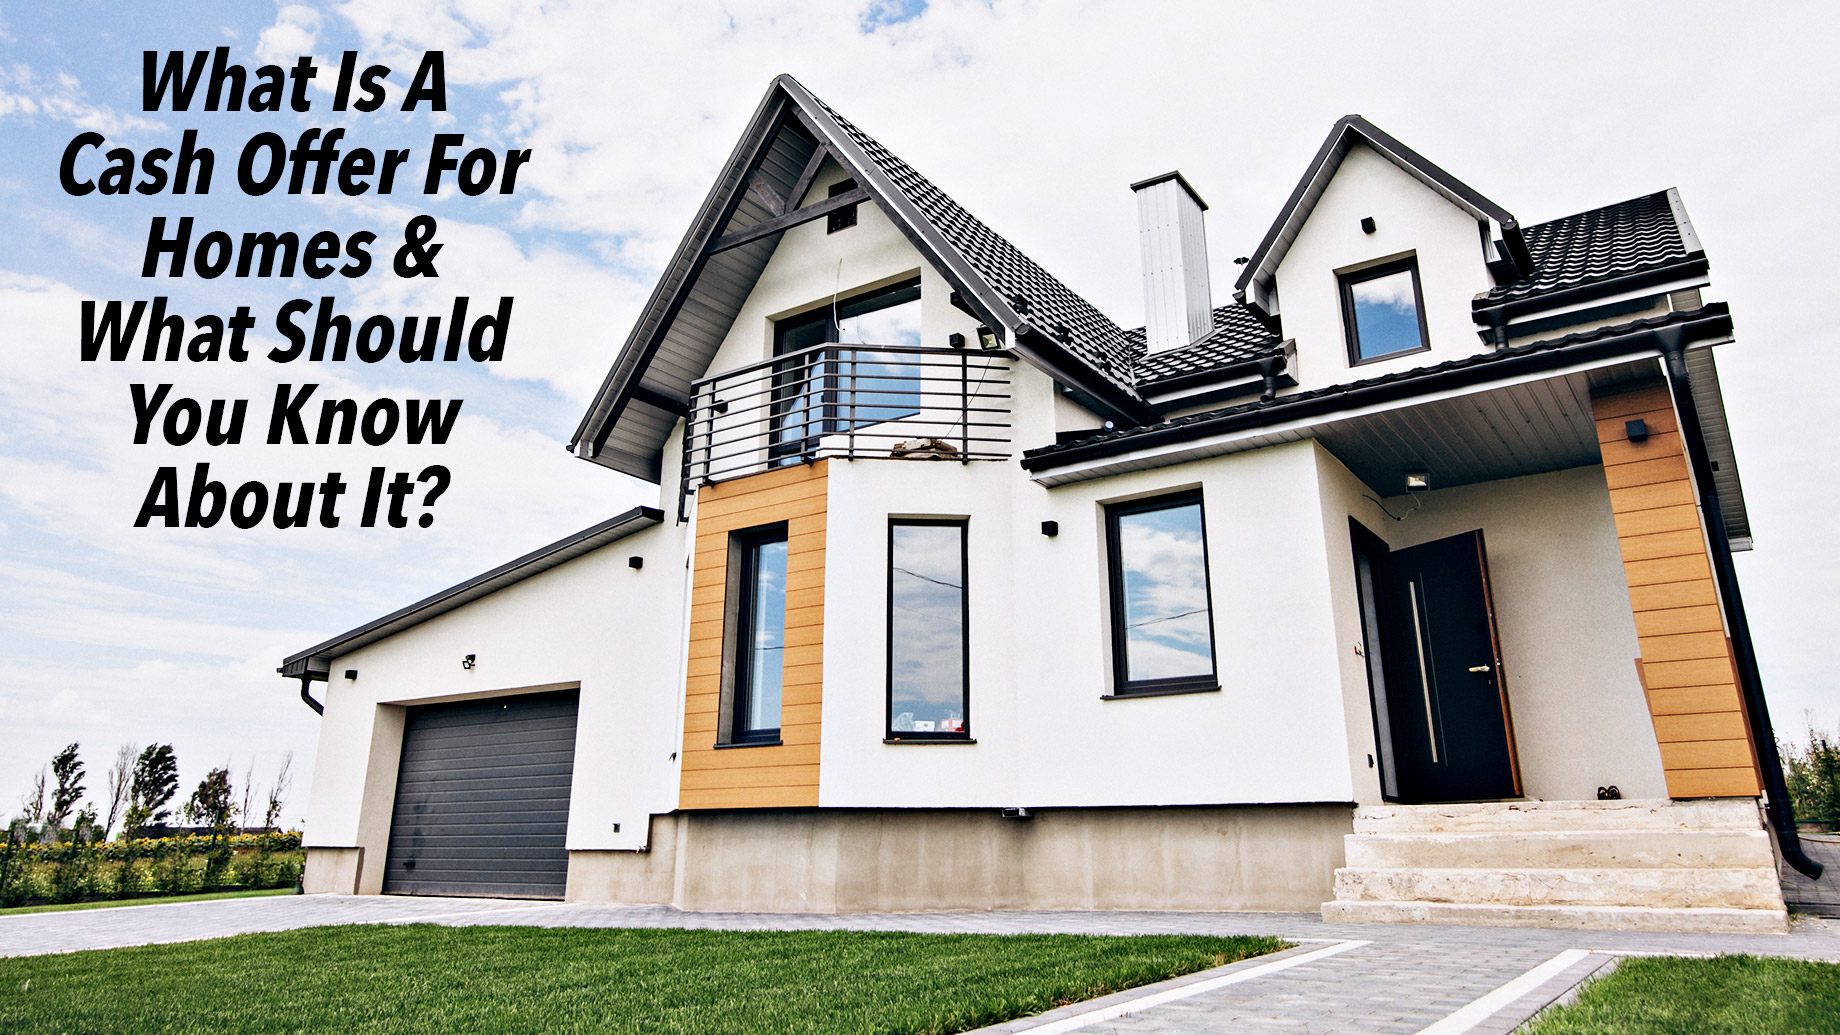 What Is A Cash Offer For Homes & What Should You Know About It?